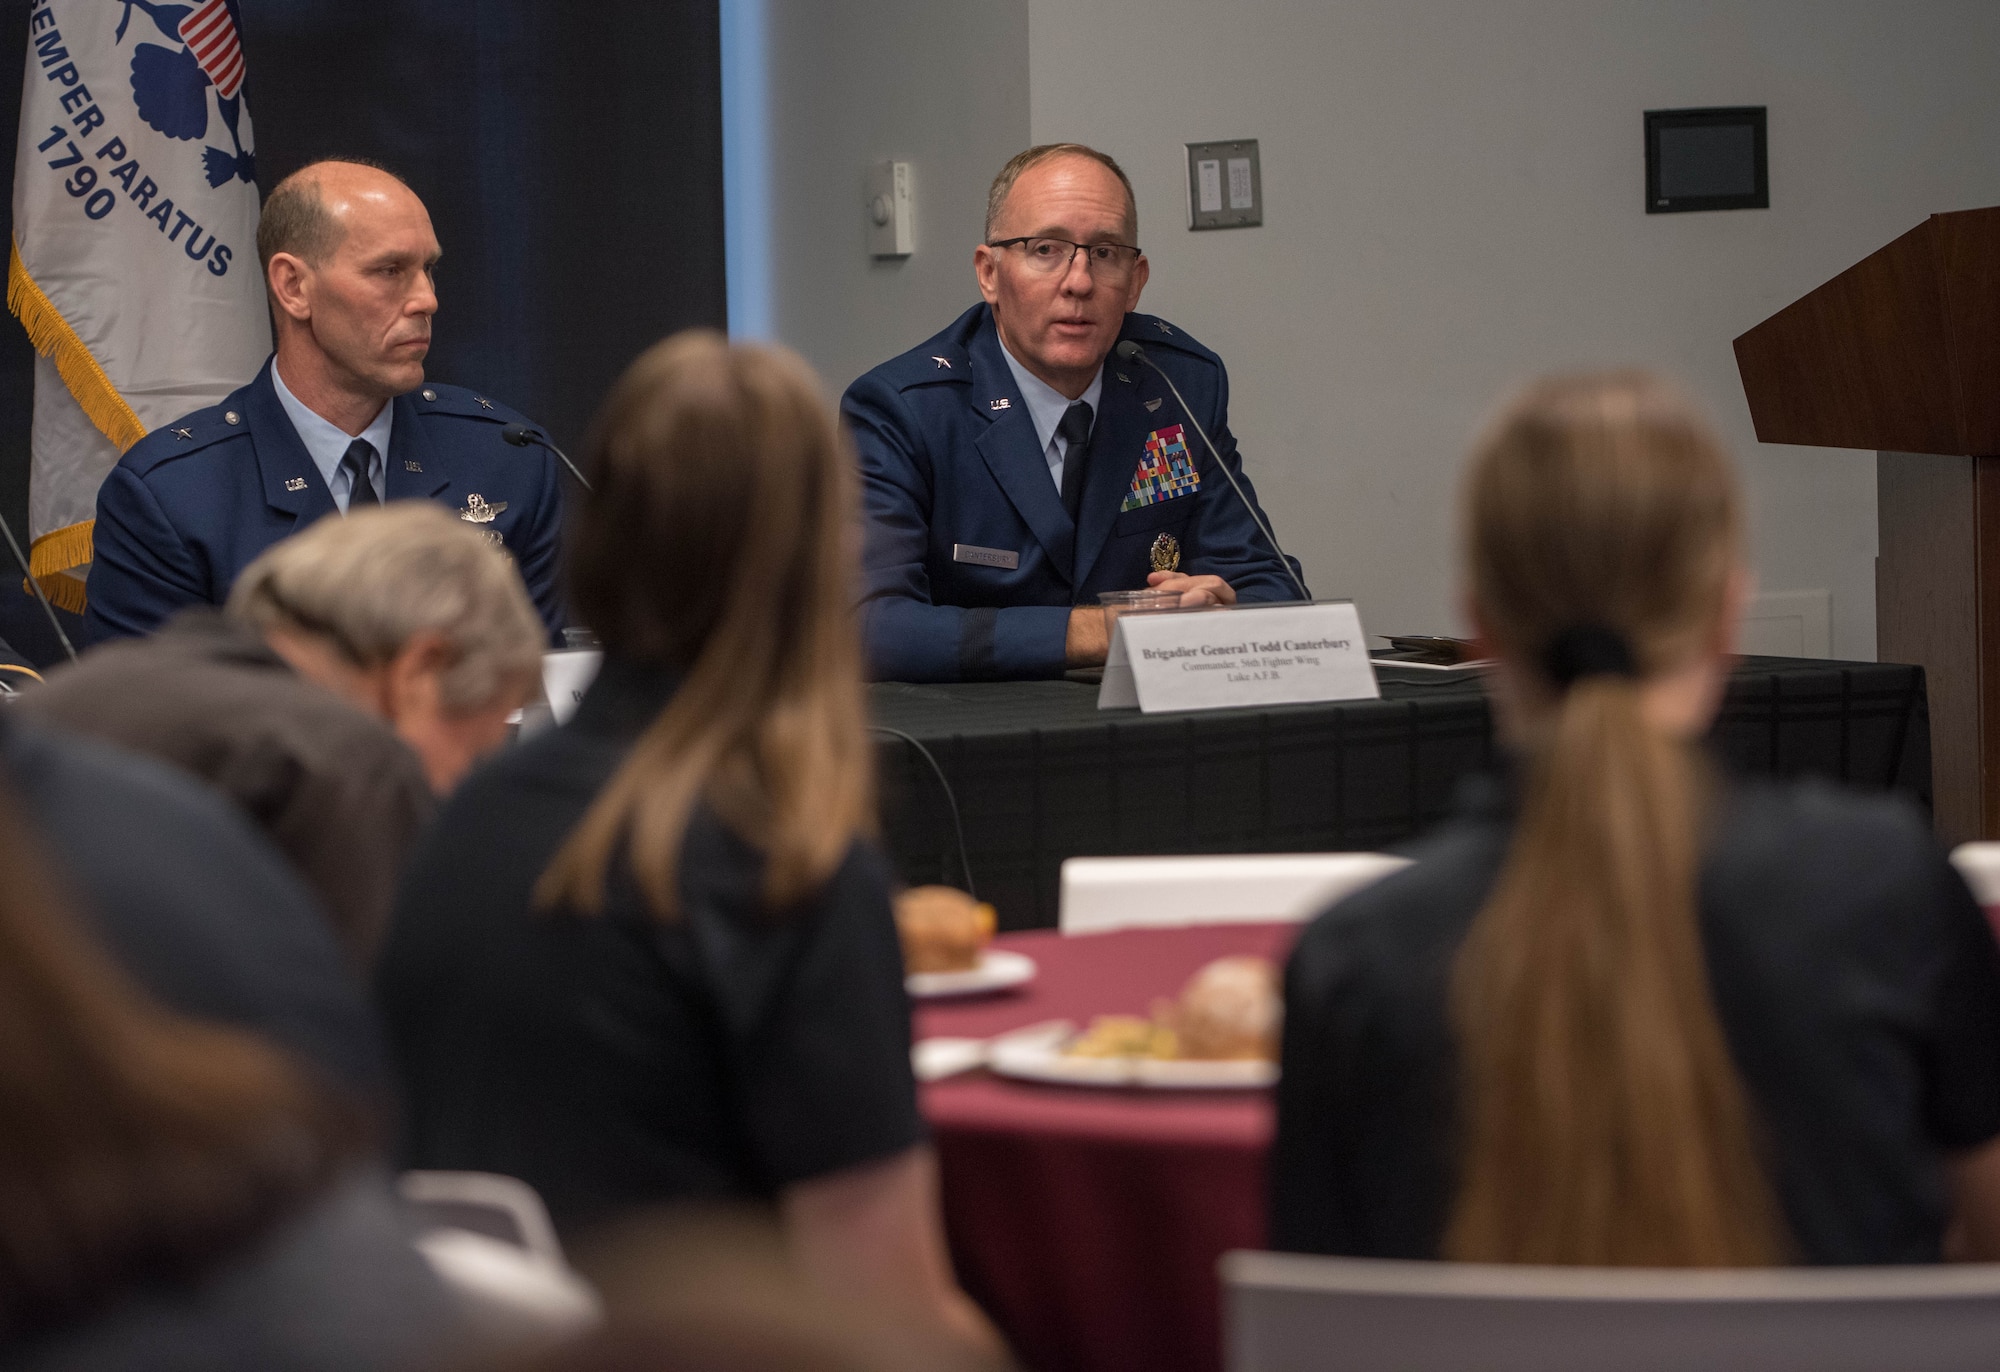 Brig. Gen. Todd D. Canterbury, 56th Fighter Wing commander, discusses key topics with Arizona military leaders during a panel discussion Nov. 1, 2019, at the Arizona State University Fulton Center in Tempe, Ariz.